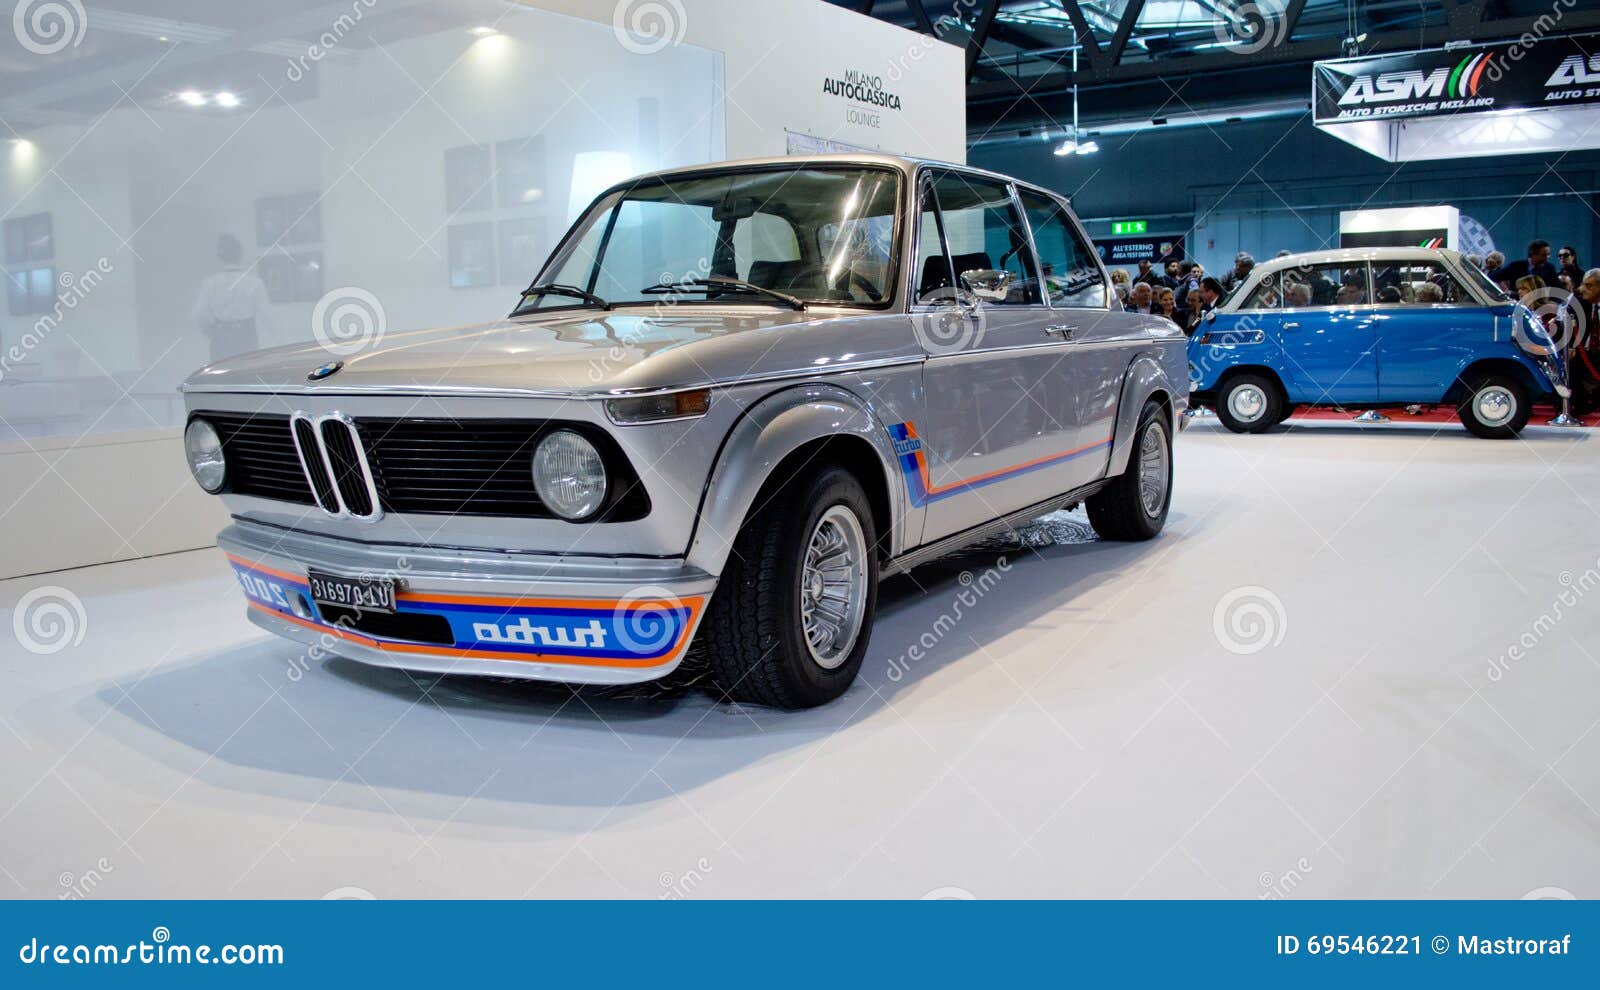 Bmw 2002 Turbo At Milano Autoclassica 2016 Editorial Photo Image Of Engine Competitive 69546221